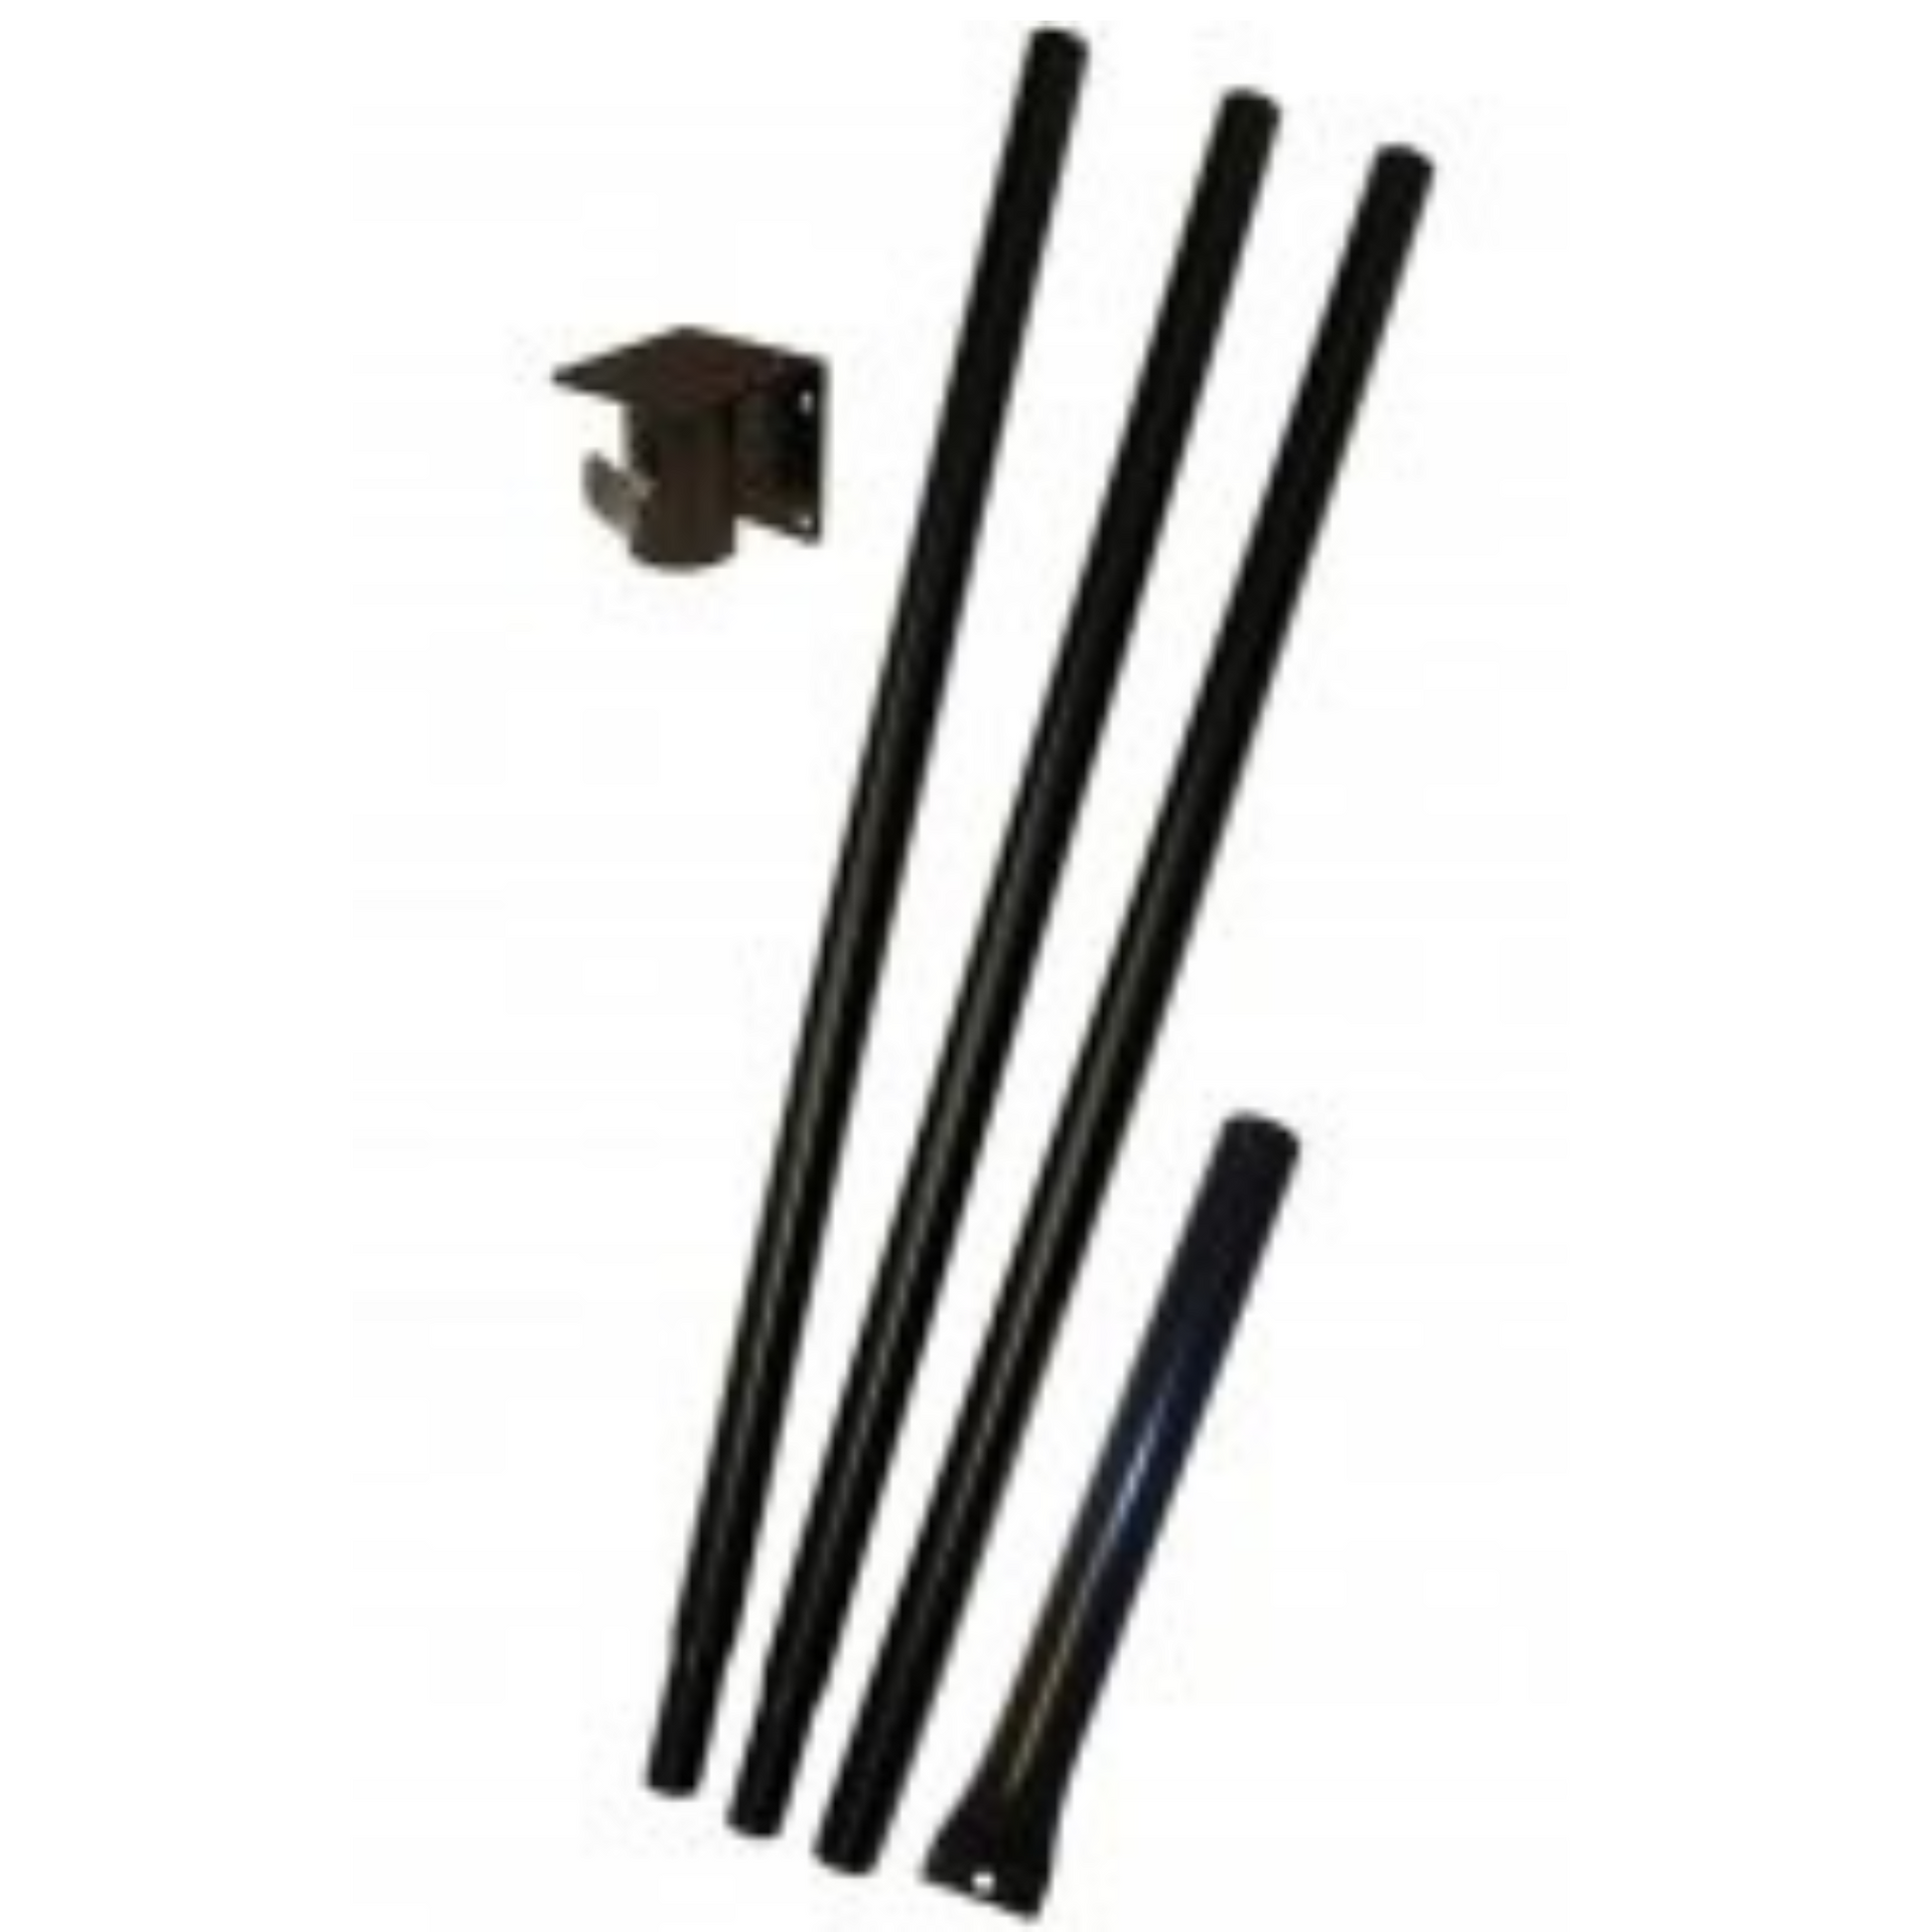 3 black metal poles with black ground socket and black post topper